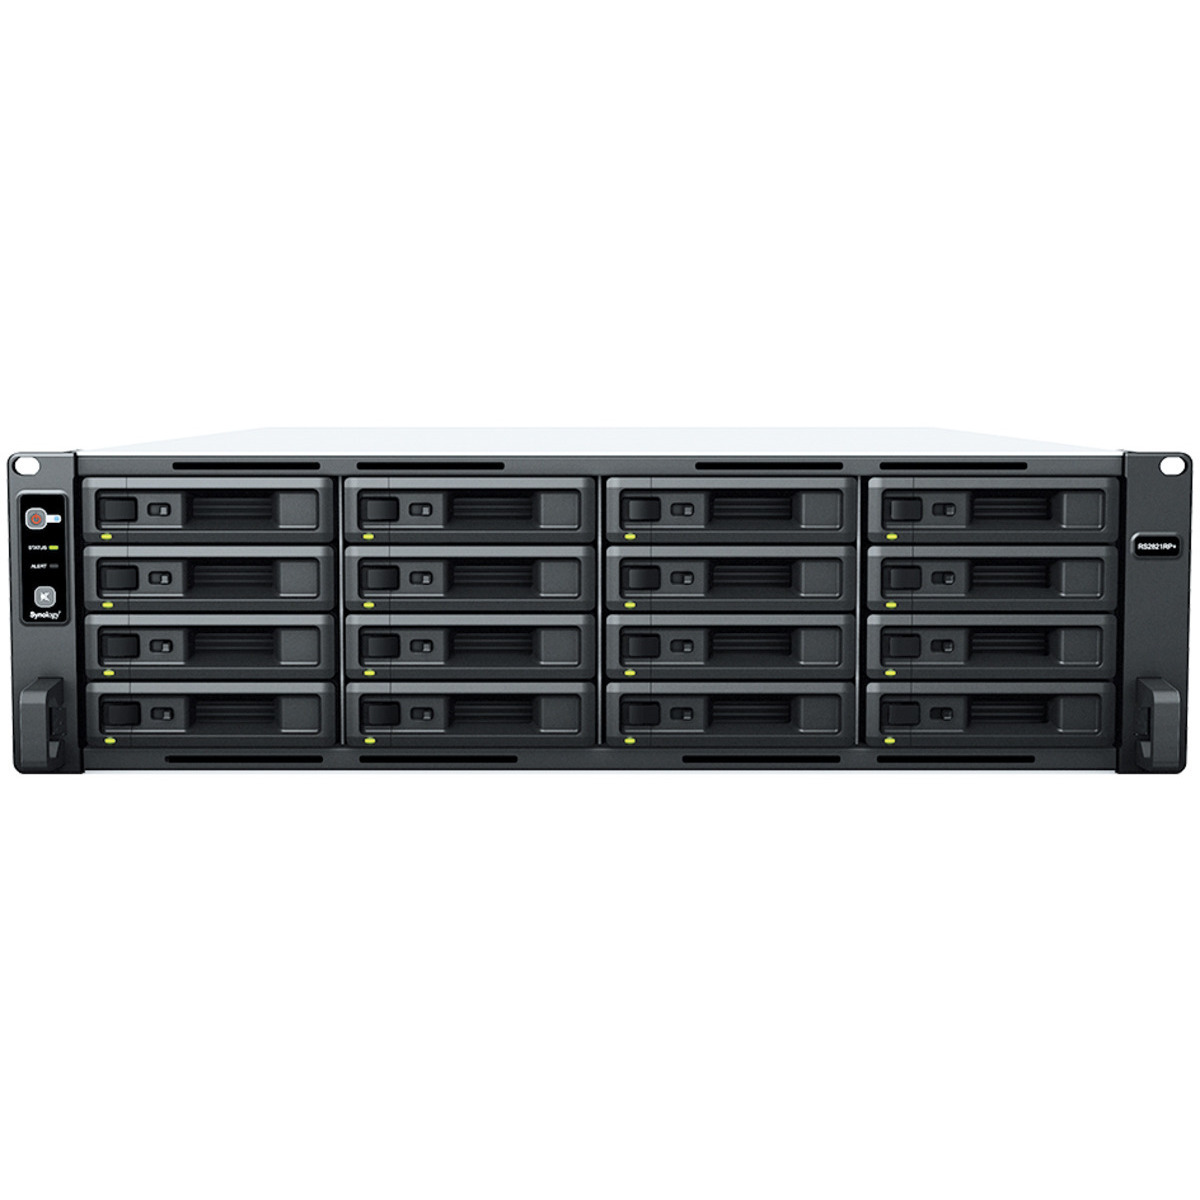 buy $8932 Synology RackStation RS2821RP+ 160tb RackMount NAS - Network Attached Storage Device 16x10000gb Seagate EXOS X16 ST10000NM001G 3.5 7200rpm SATA 6Gb/s HDD ENTERPRISE Class Drives Installed - Burn-In Tested - nas headquarters buy network attached storage server device das new raid-5 free shipping usa christmas new year holiday sale RackStation RS2821RP+